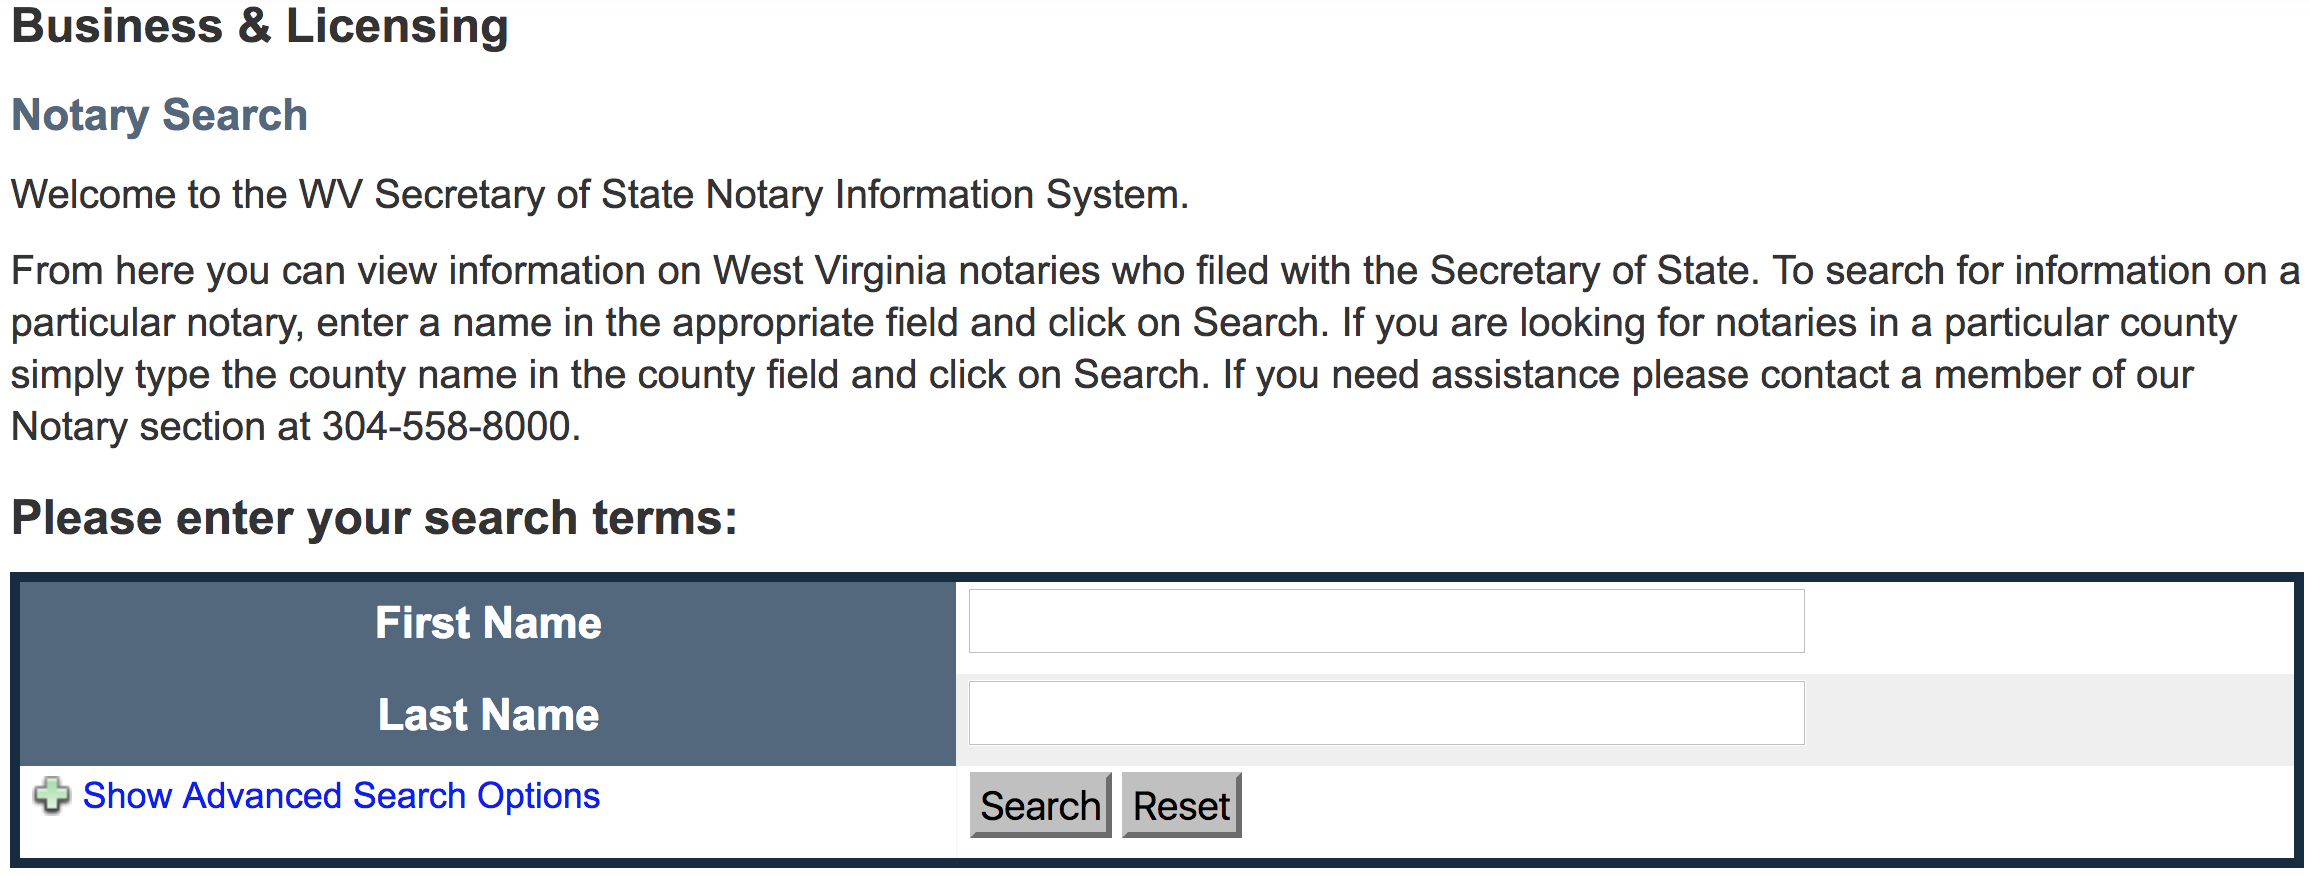 notary search fields